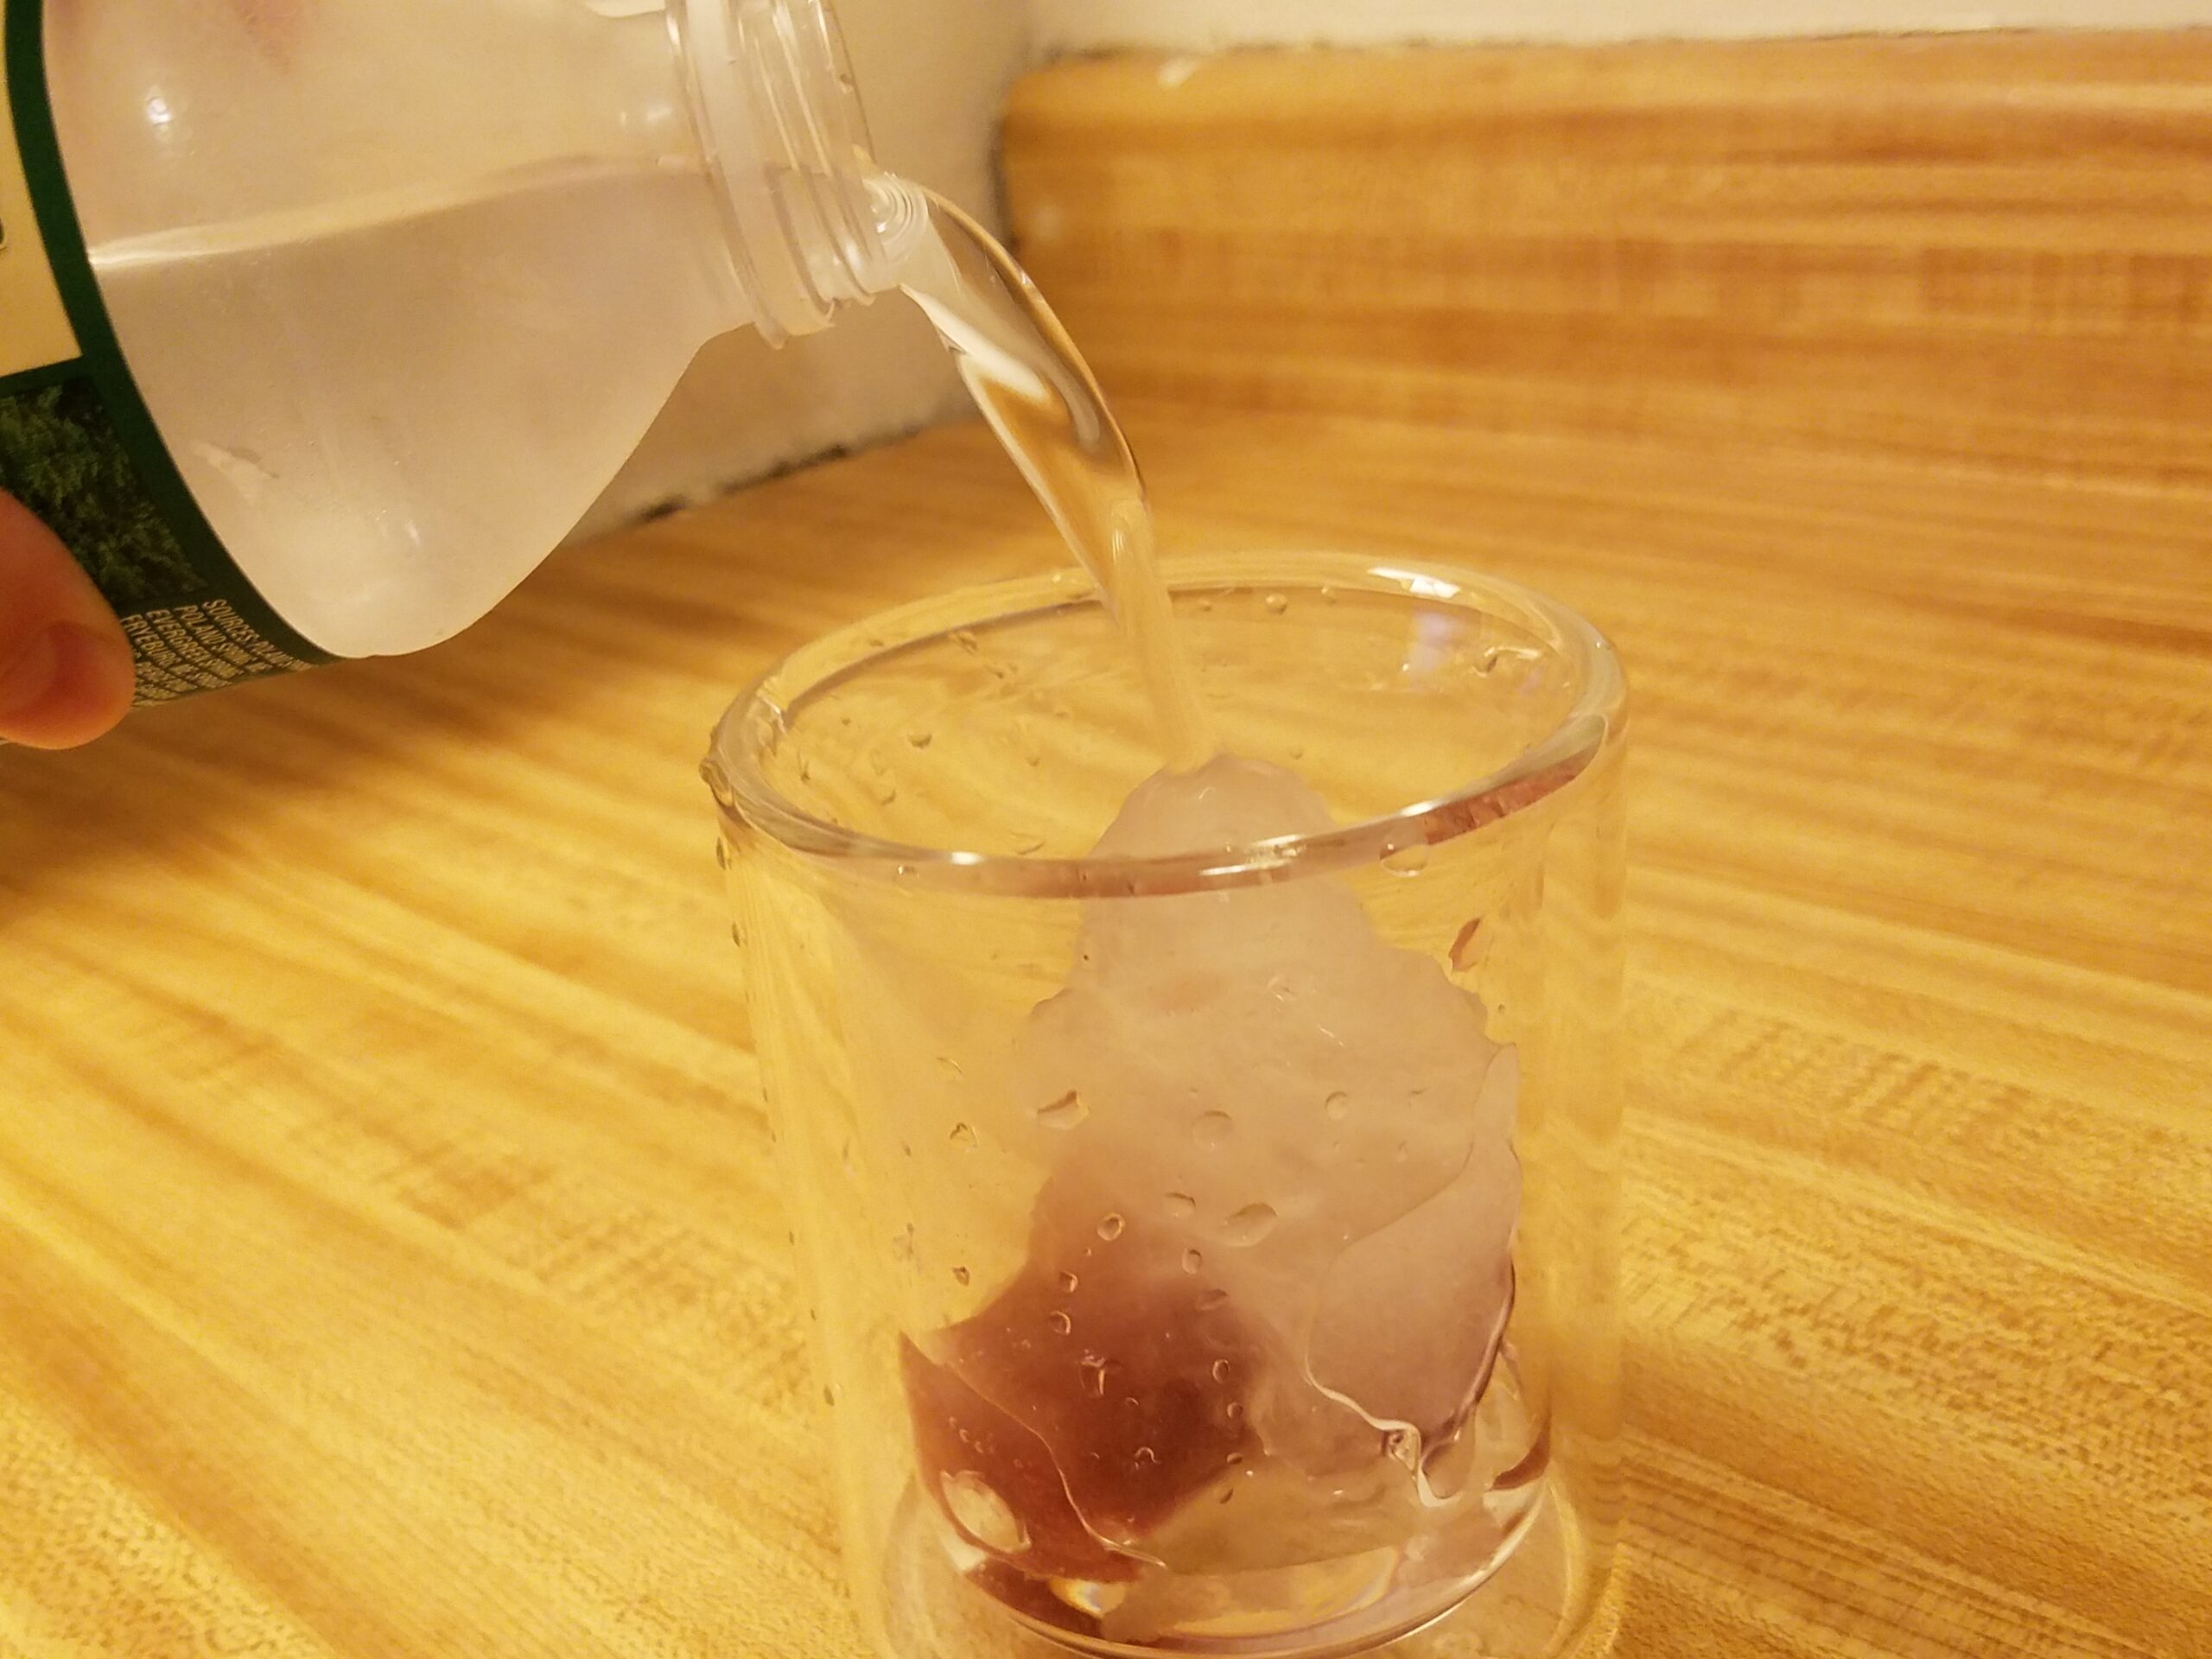 Lad Shows Water In Bottle Instantly Freezing 